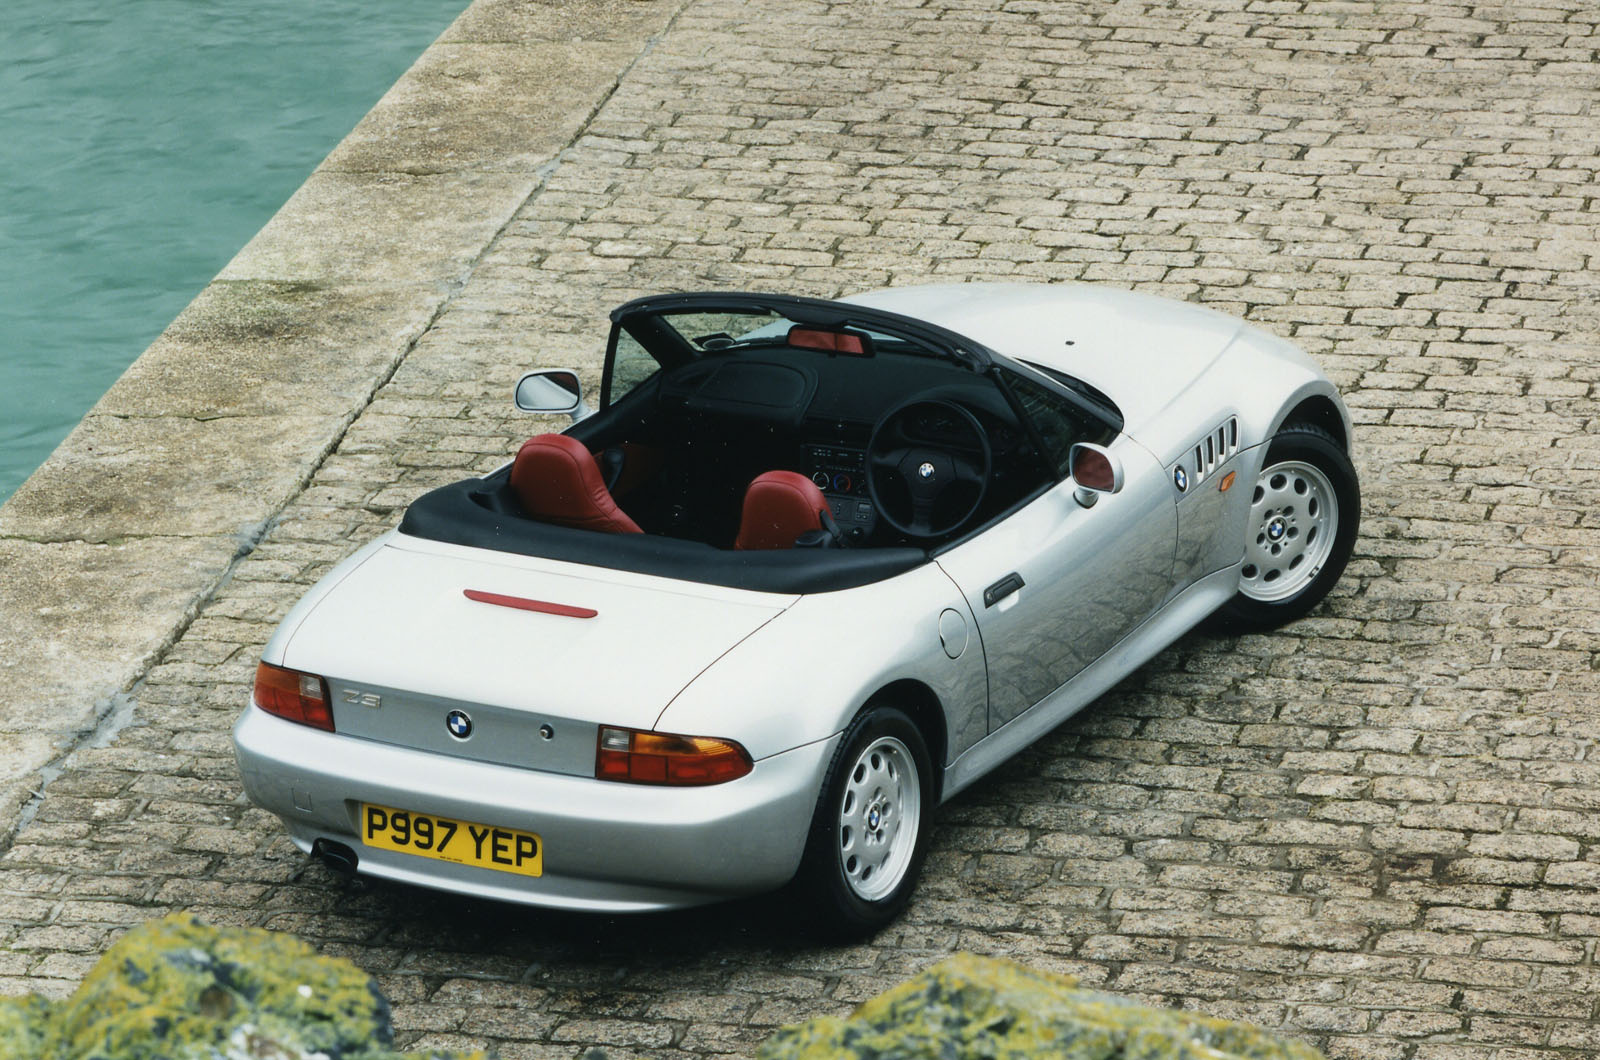 Used car buying guide: BMW Z3